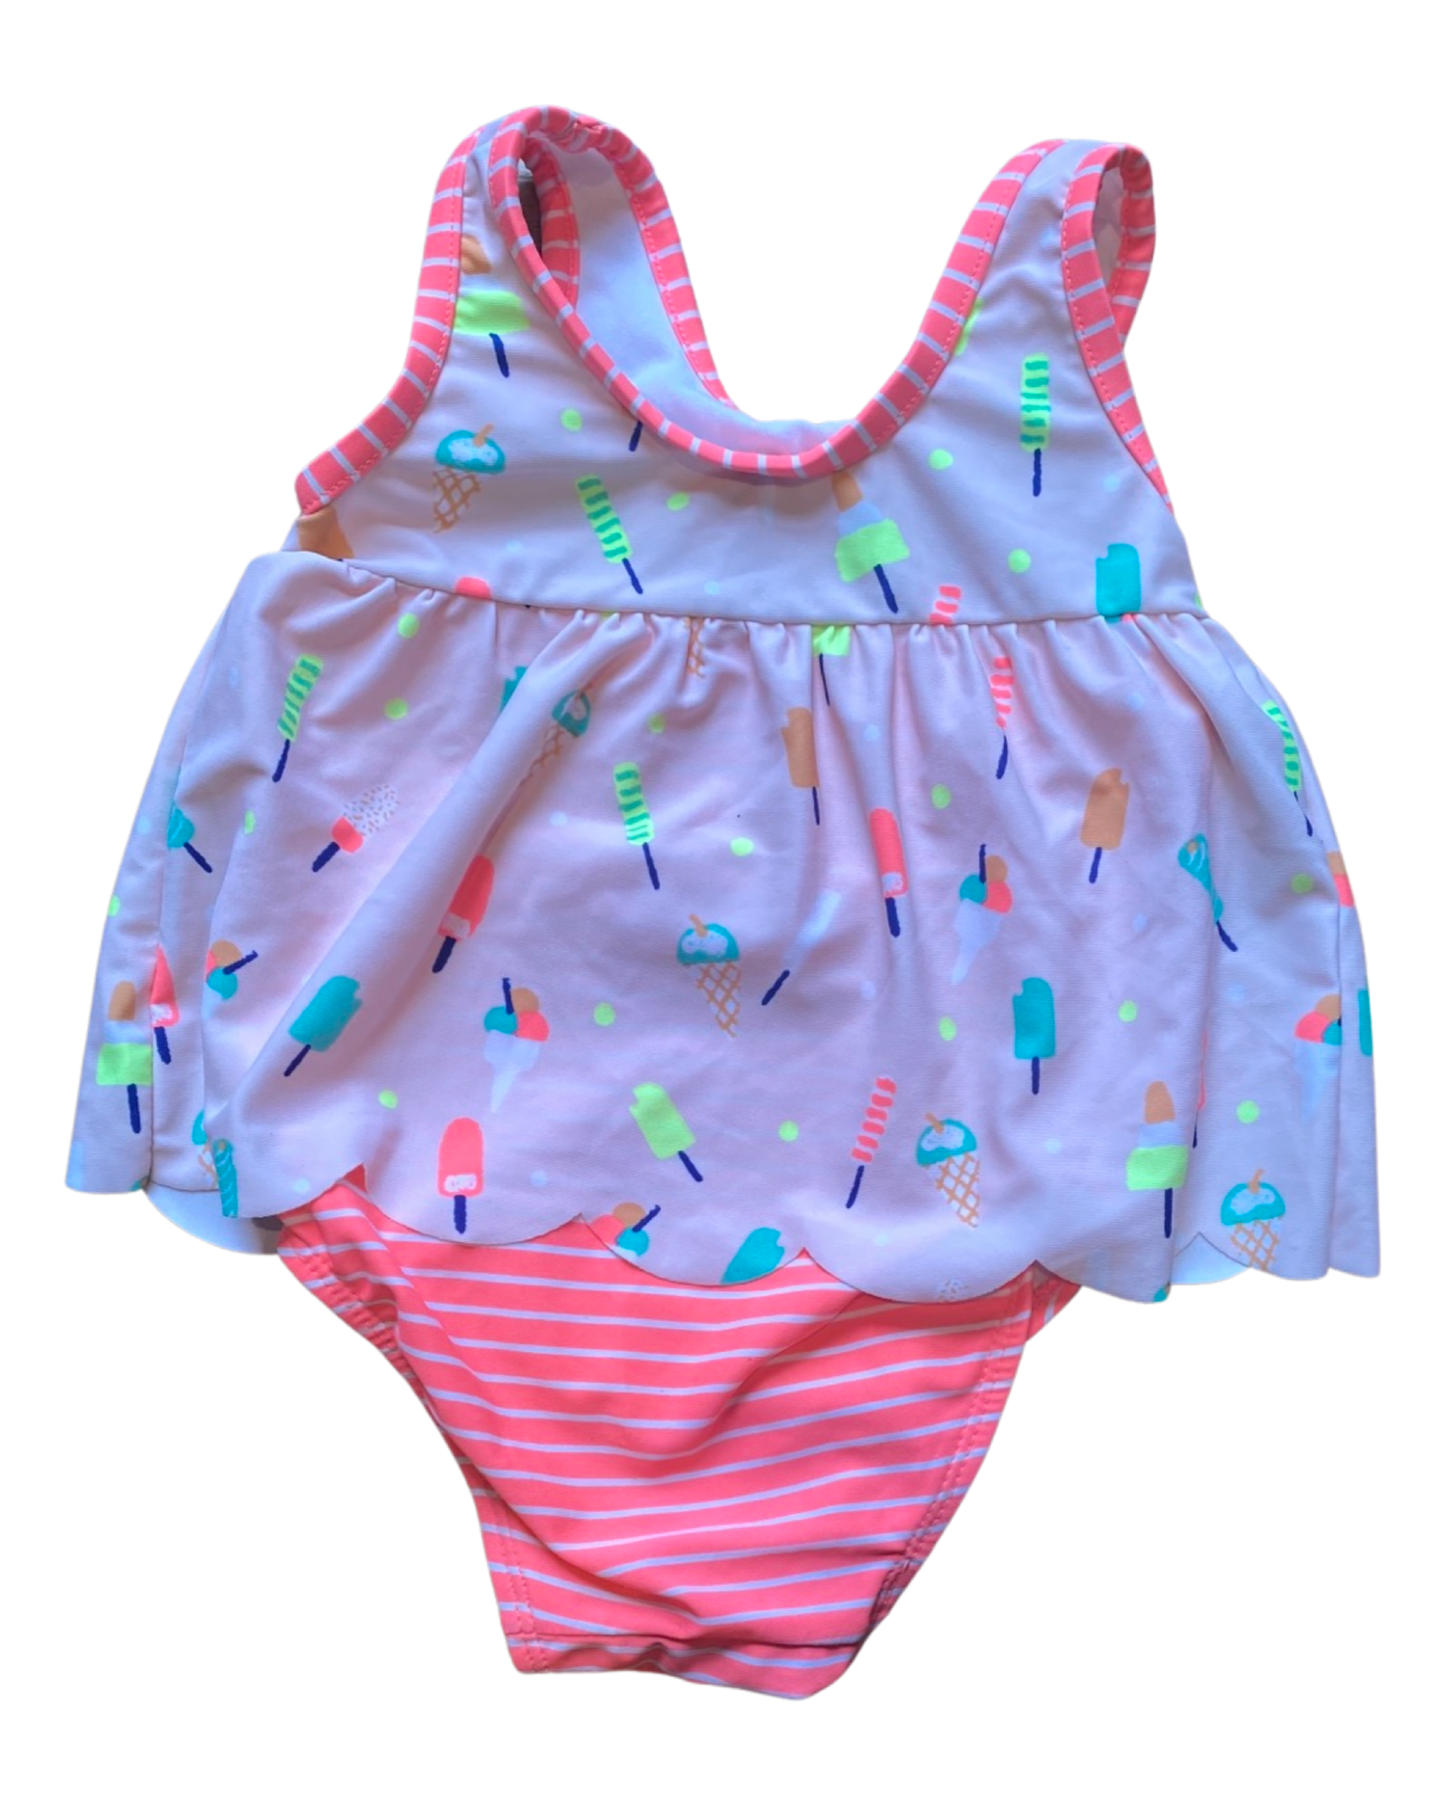 Baby Gap lolly print swimsuit (size 12-18mths)